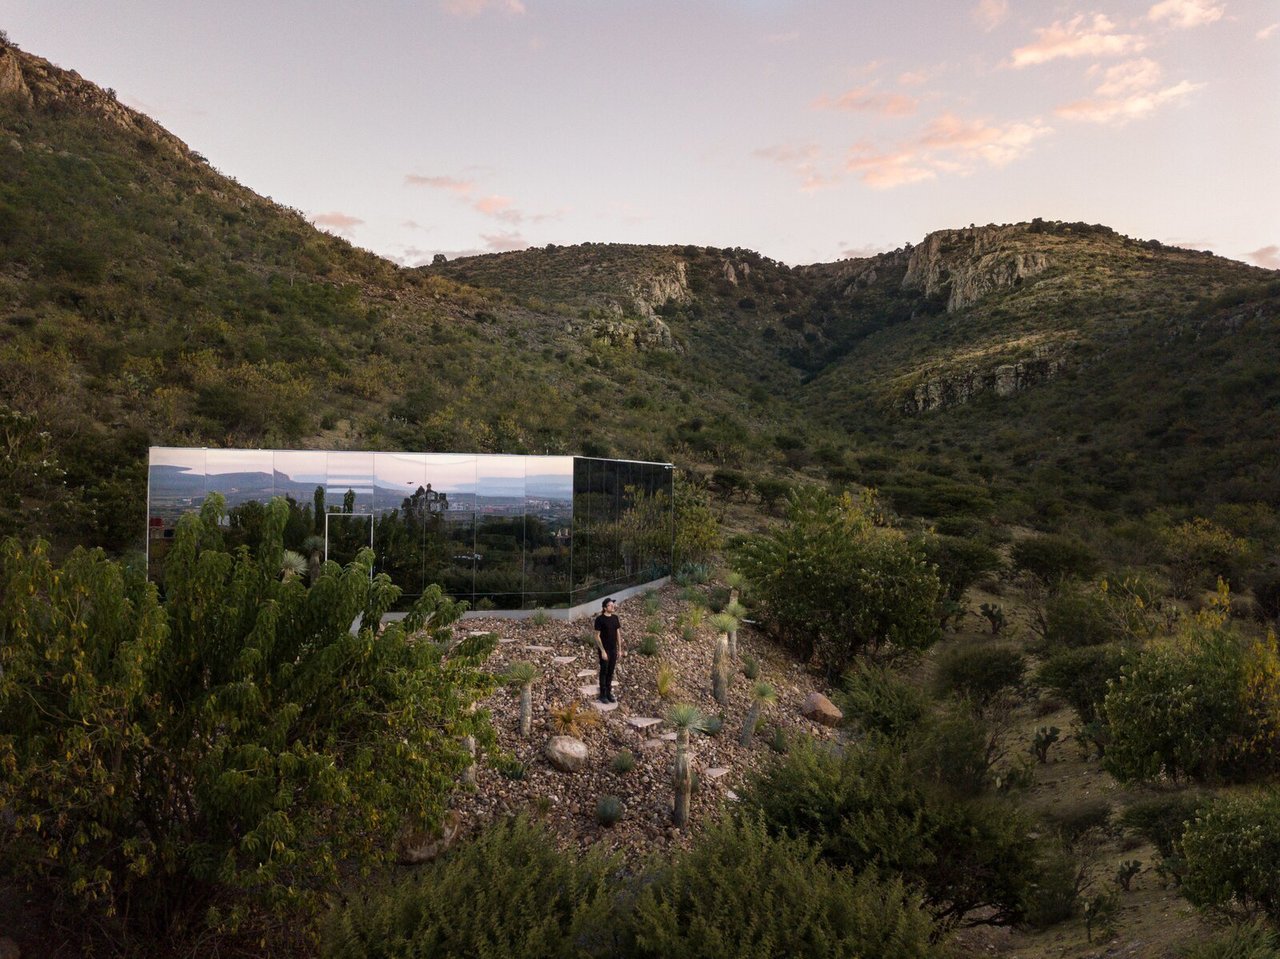 A Mirrored Hideaway Rises on an Extinct Volcano in Central Mexico